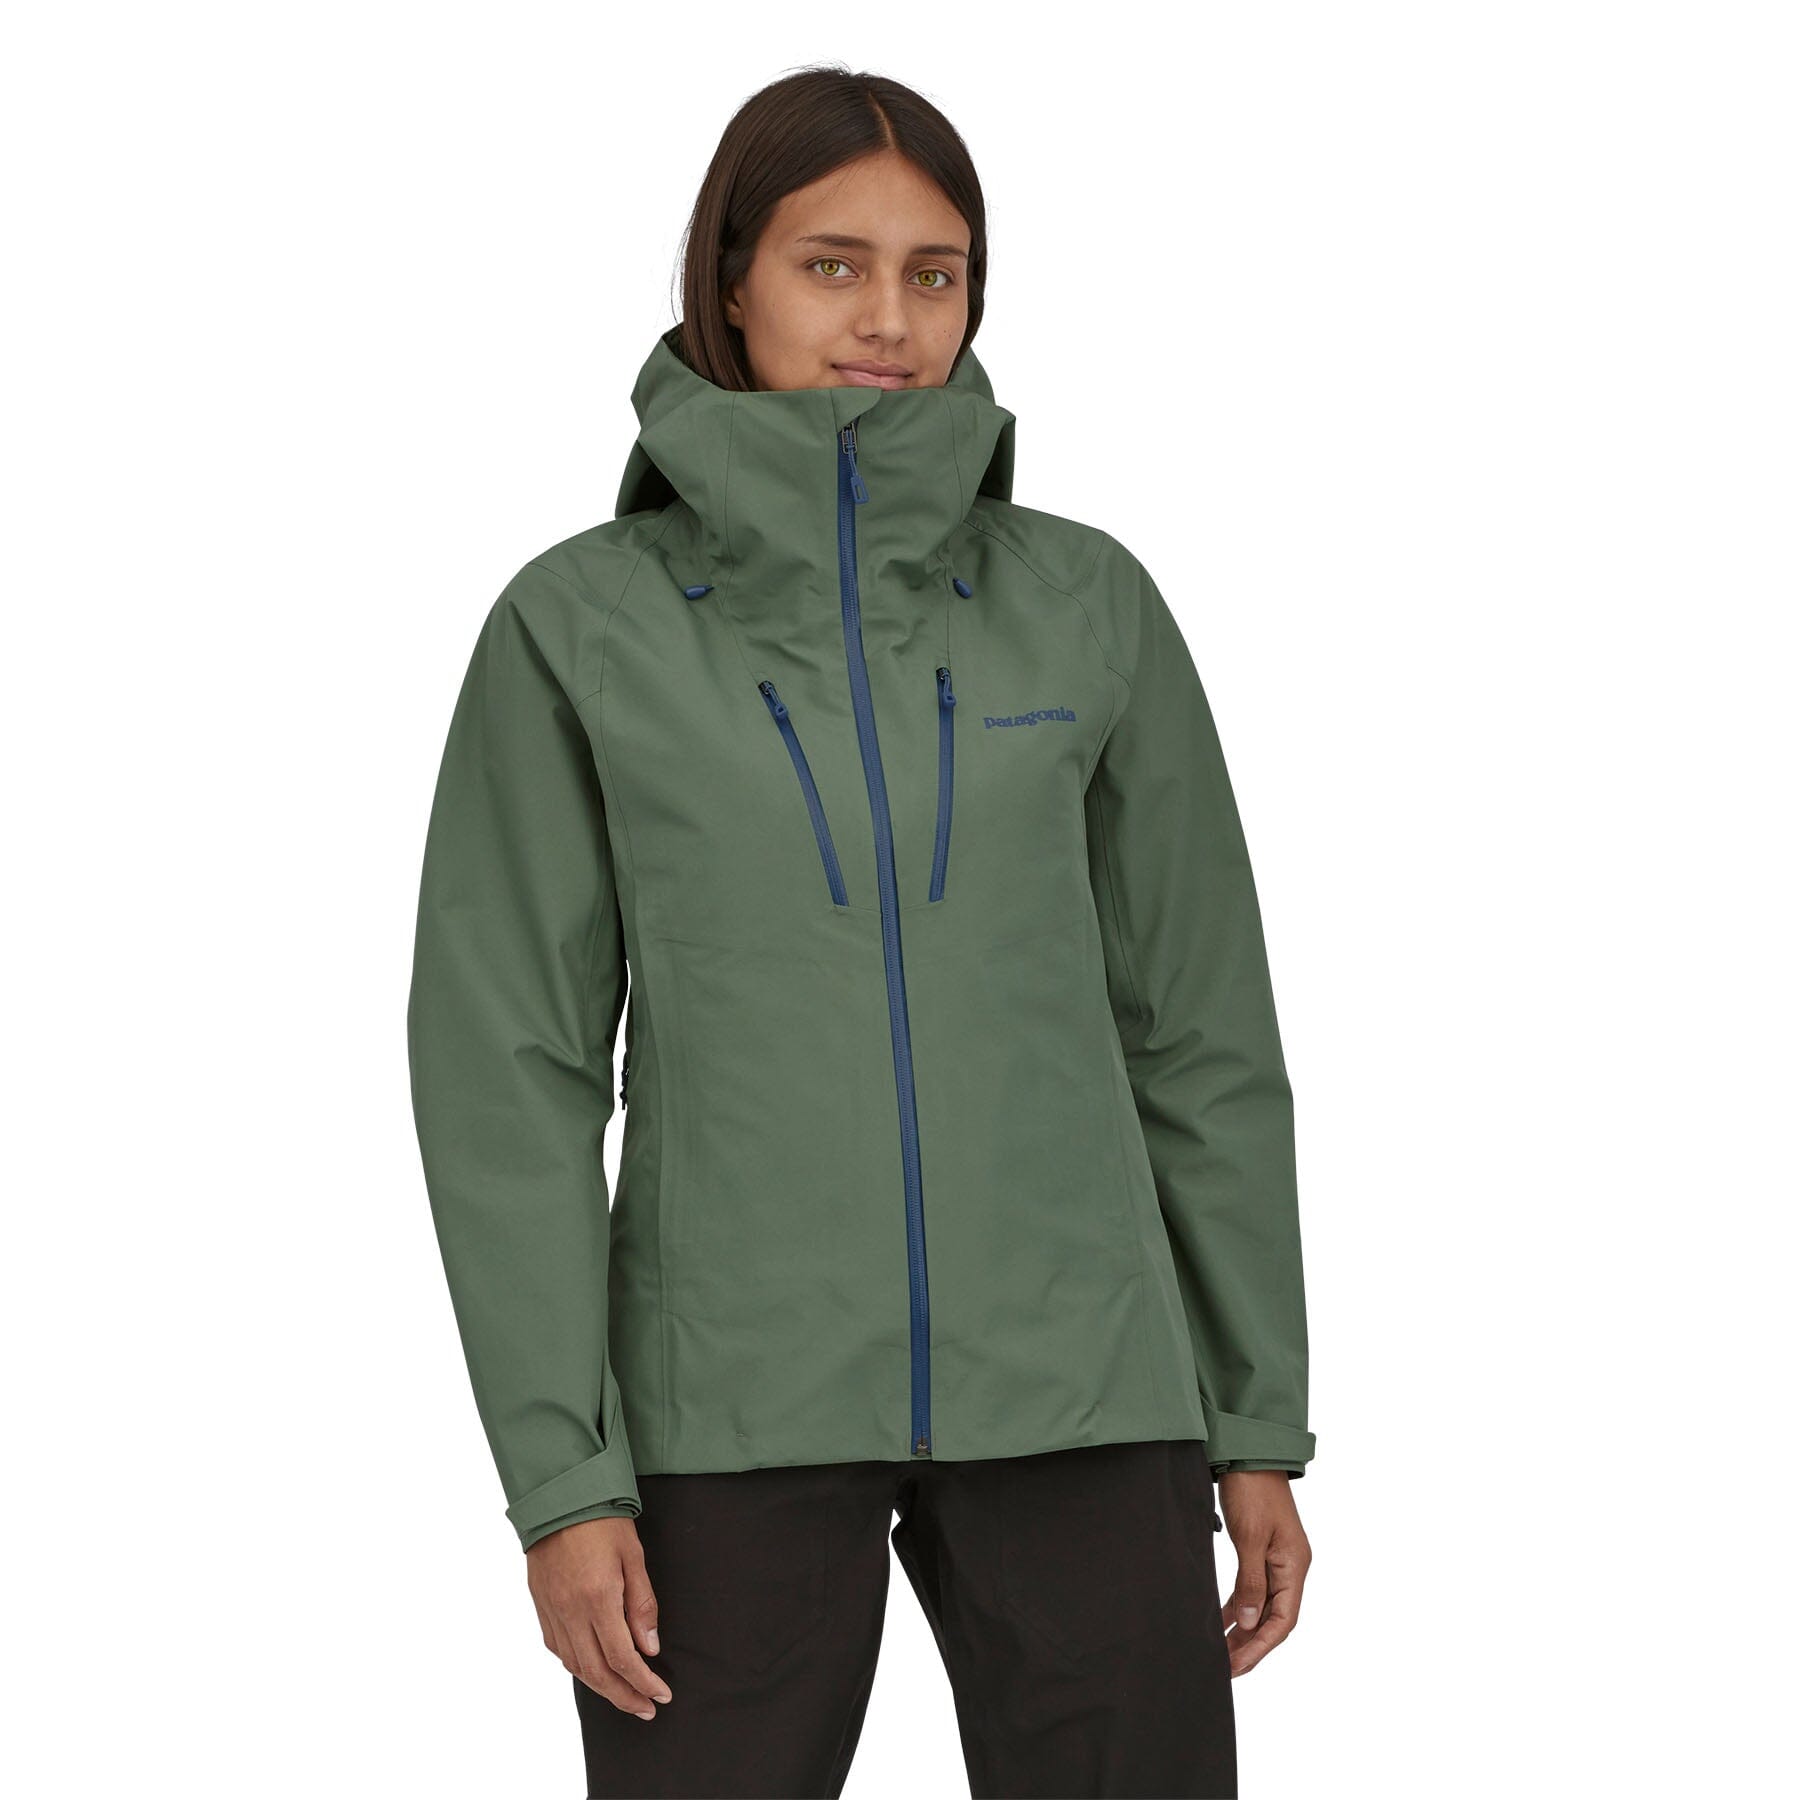 Patagonia Triolet Shell Jacket - Recycled Polyester - Weekendbee - sportswear